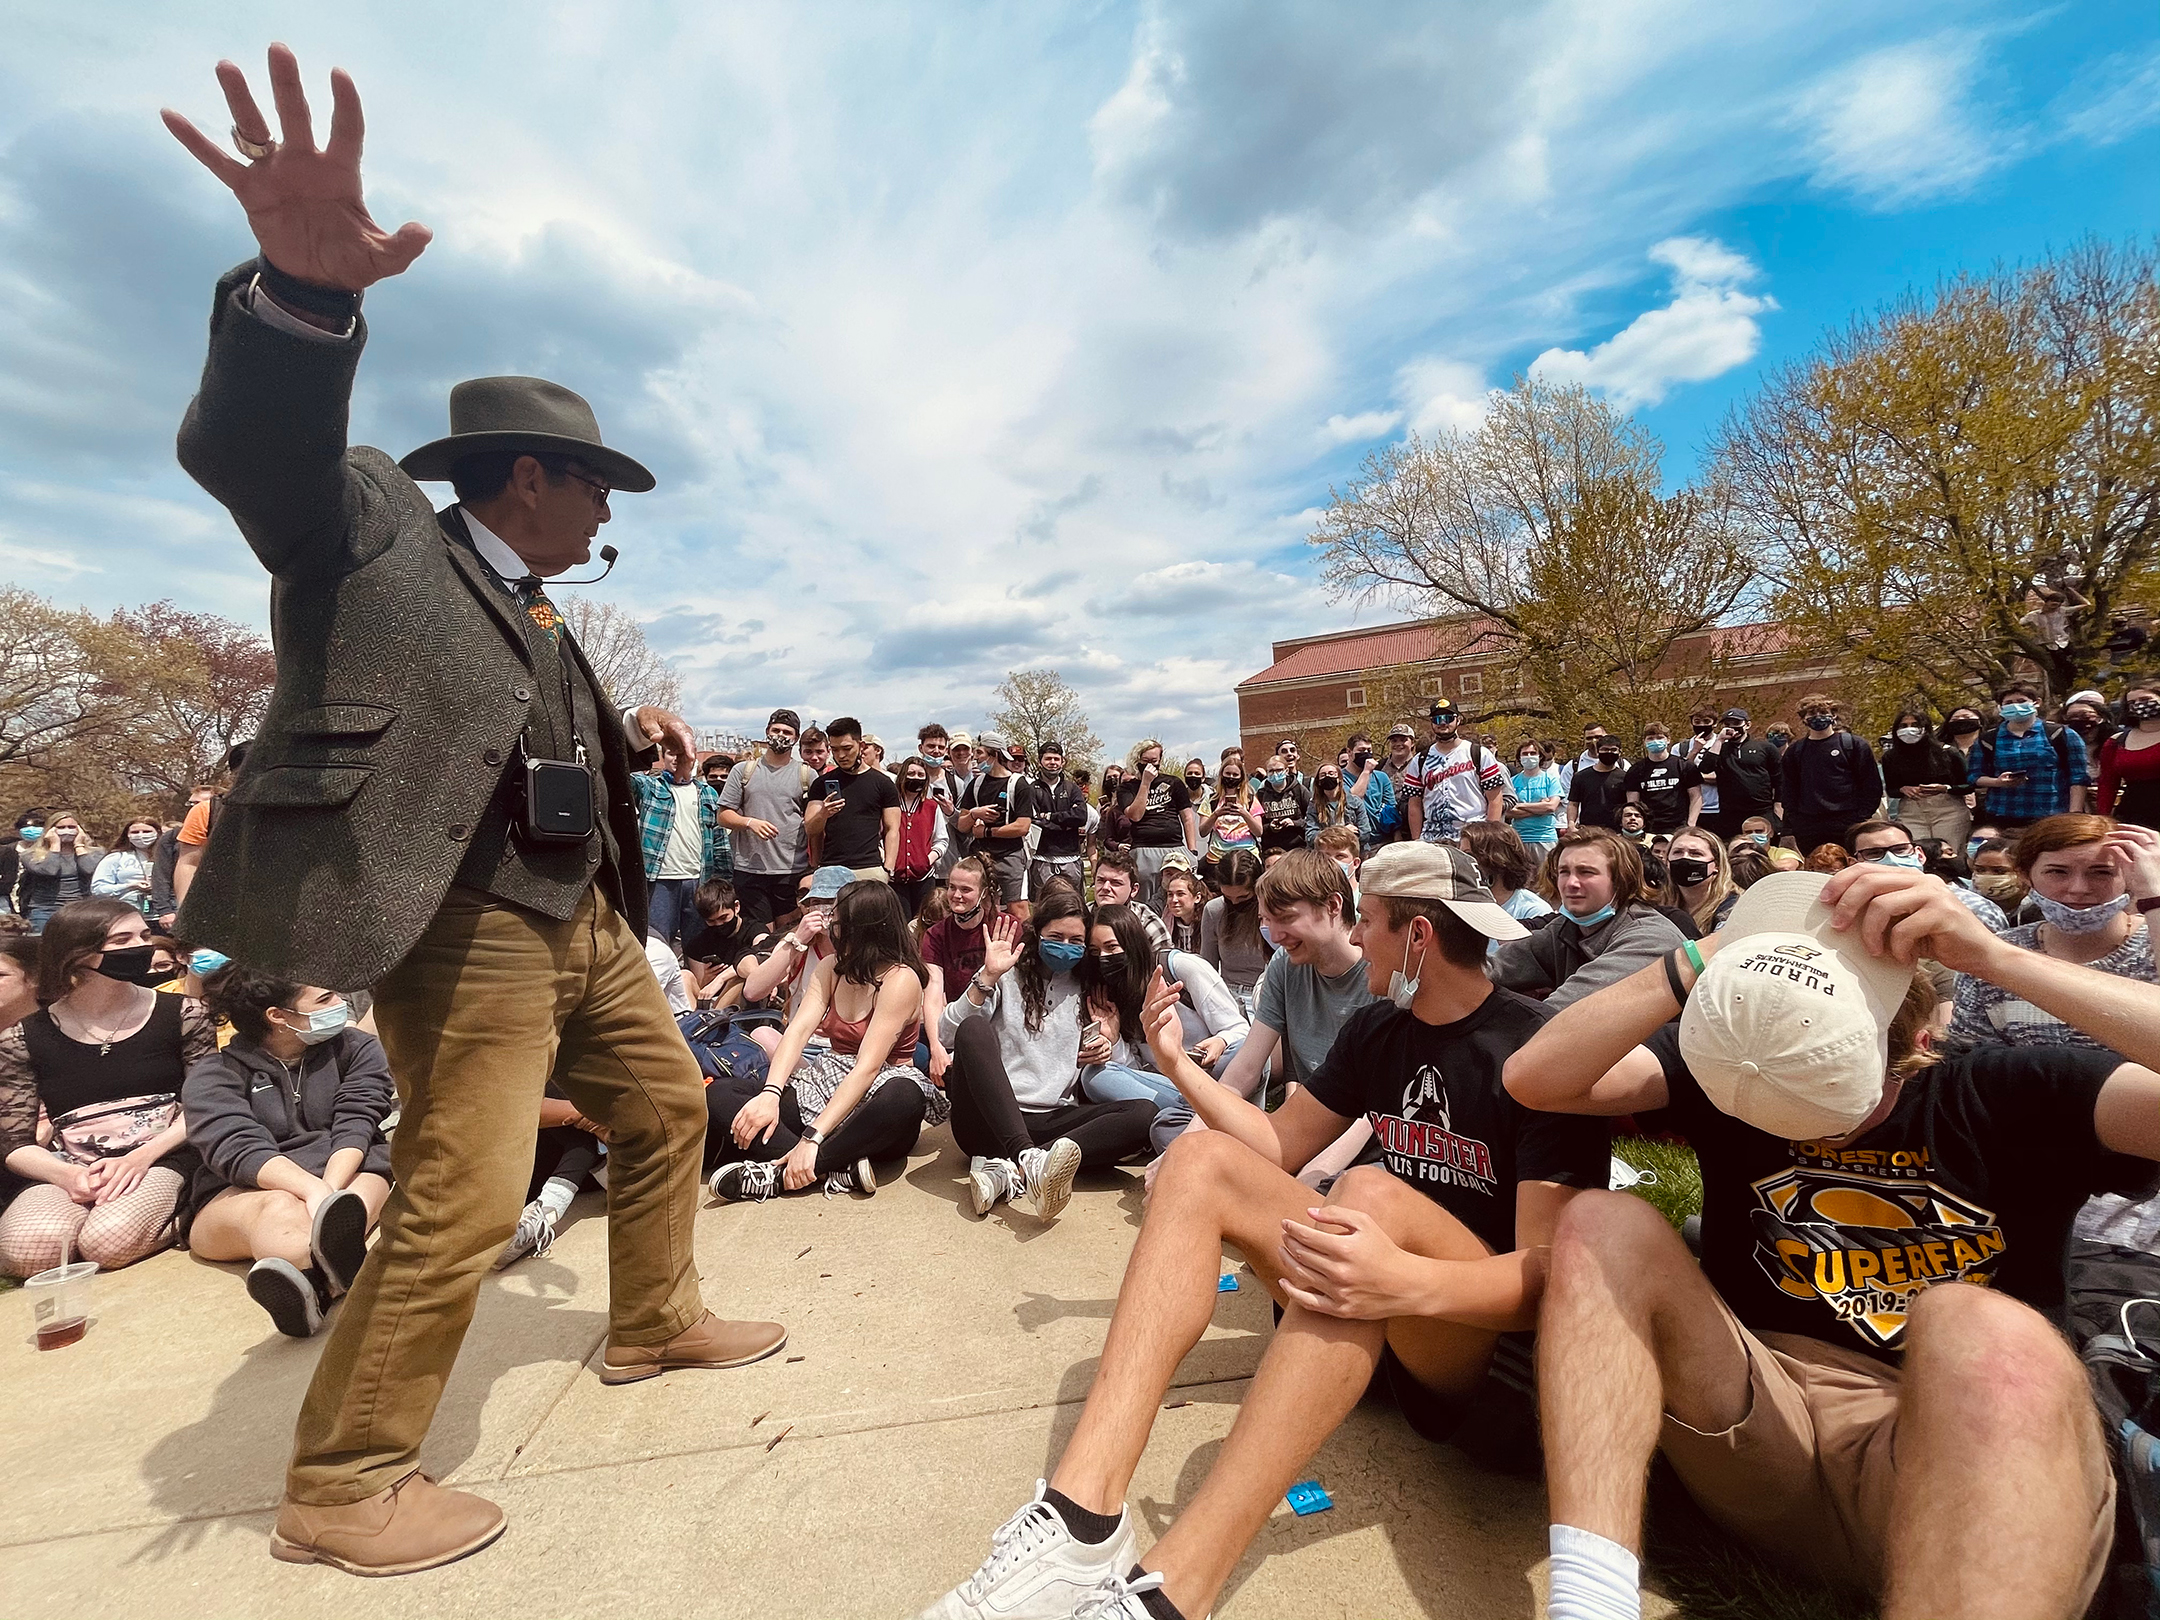 Man with outstretched arm and wearing a microphone in front of a large outdoor crowd of college students